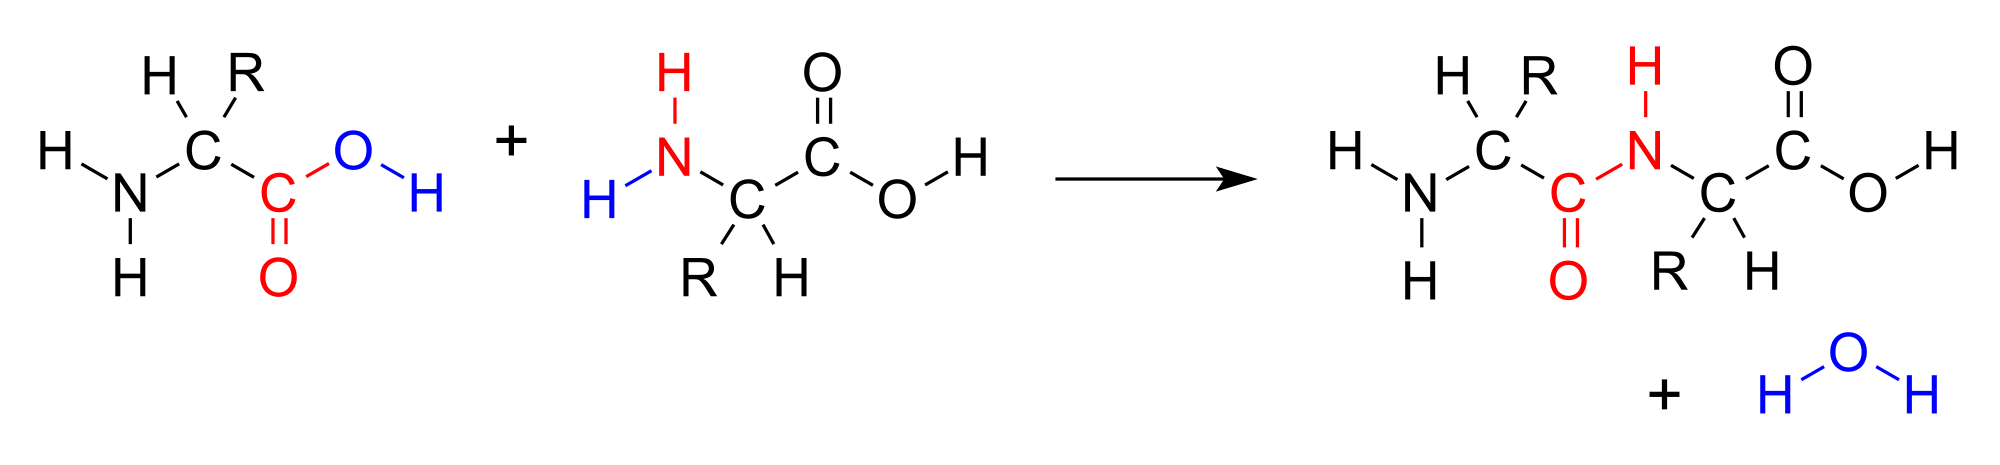 Structure of a generic condensation reaction